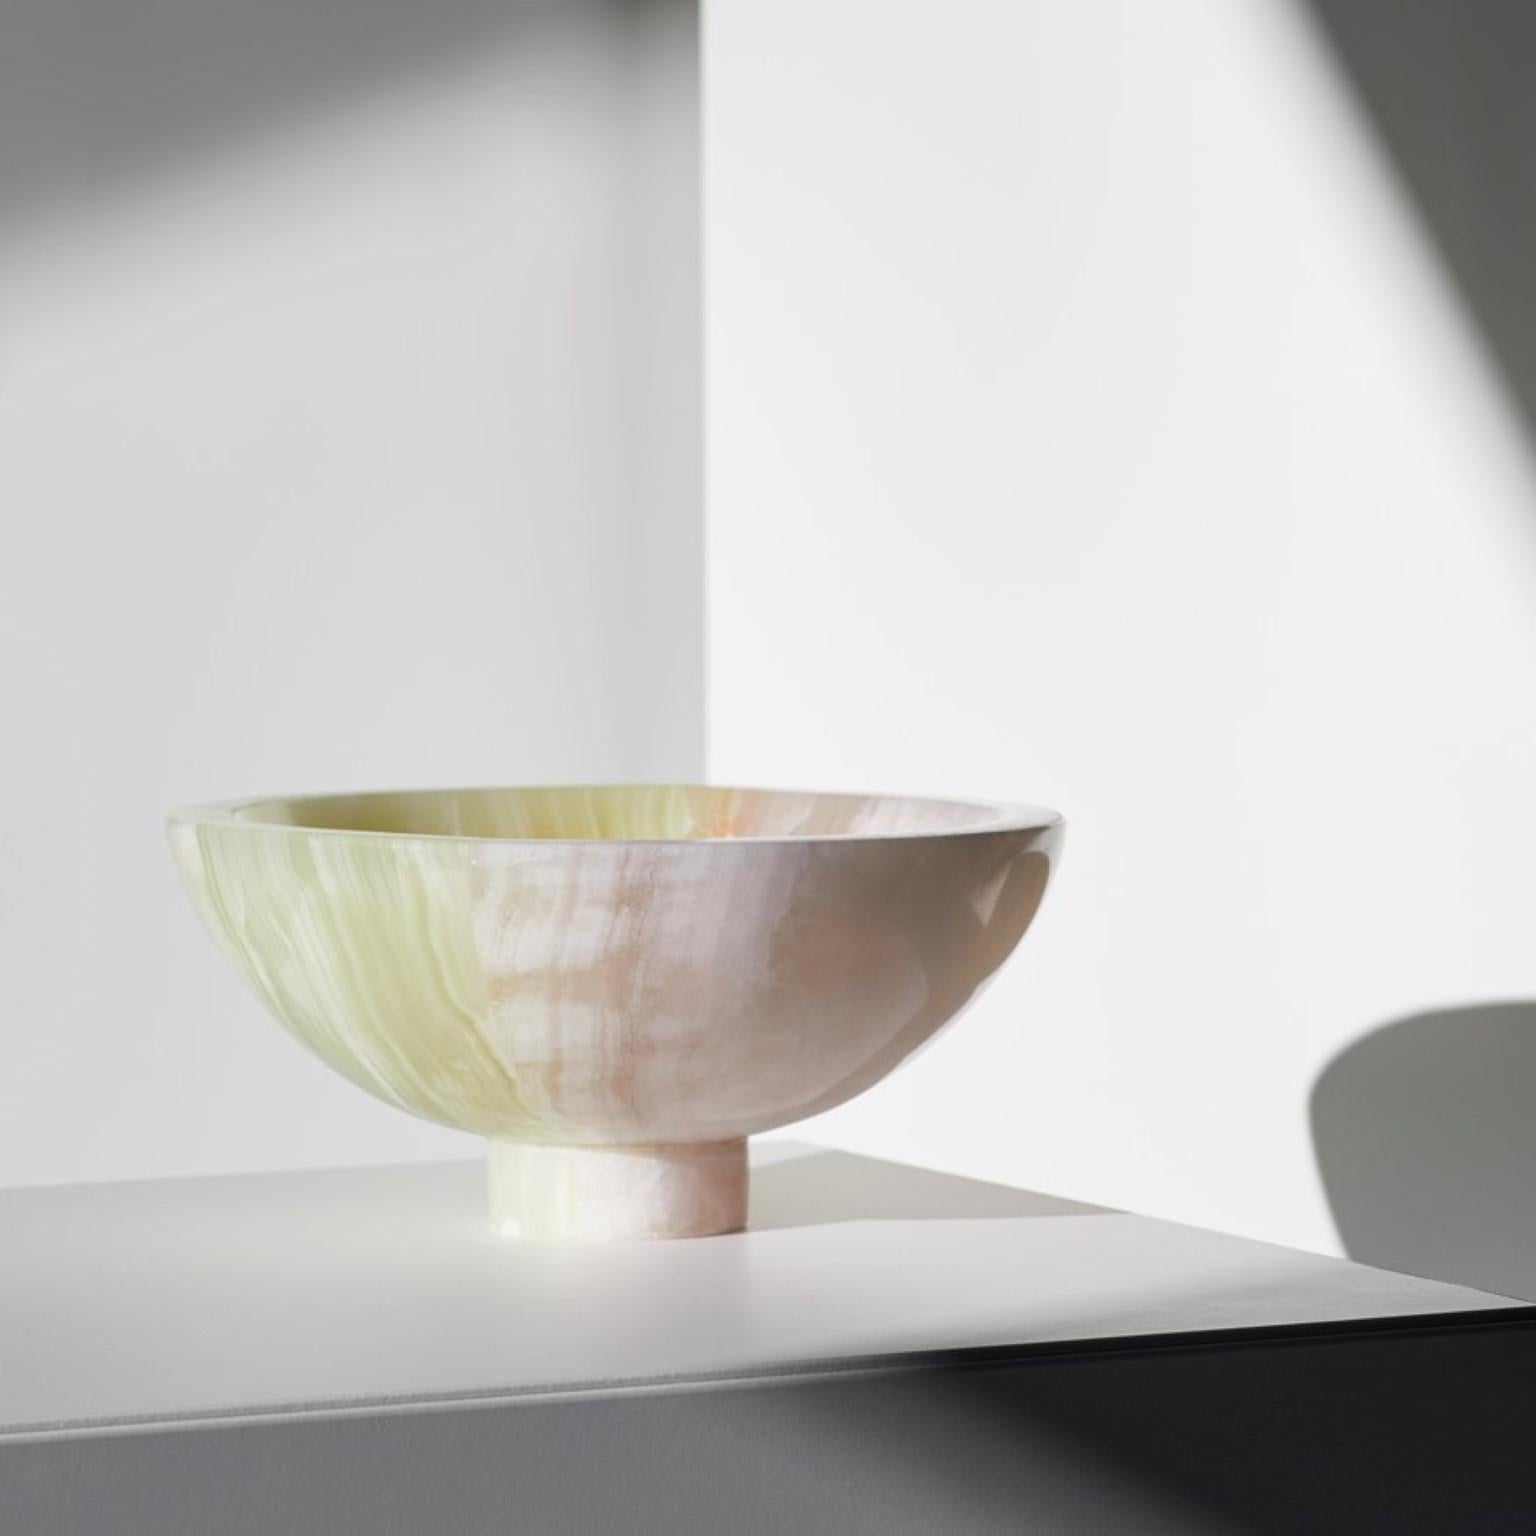 Twosidestory bowl by Lisette Rützou
Dimensions: D 20 cm
Materials: Candy Onyx

 Lisette Rützou’s design is motivated by an urge to articulate a story. Inspired by the beauty of materials, form and architecture, each design is an independent